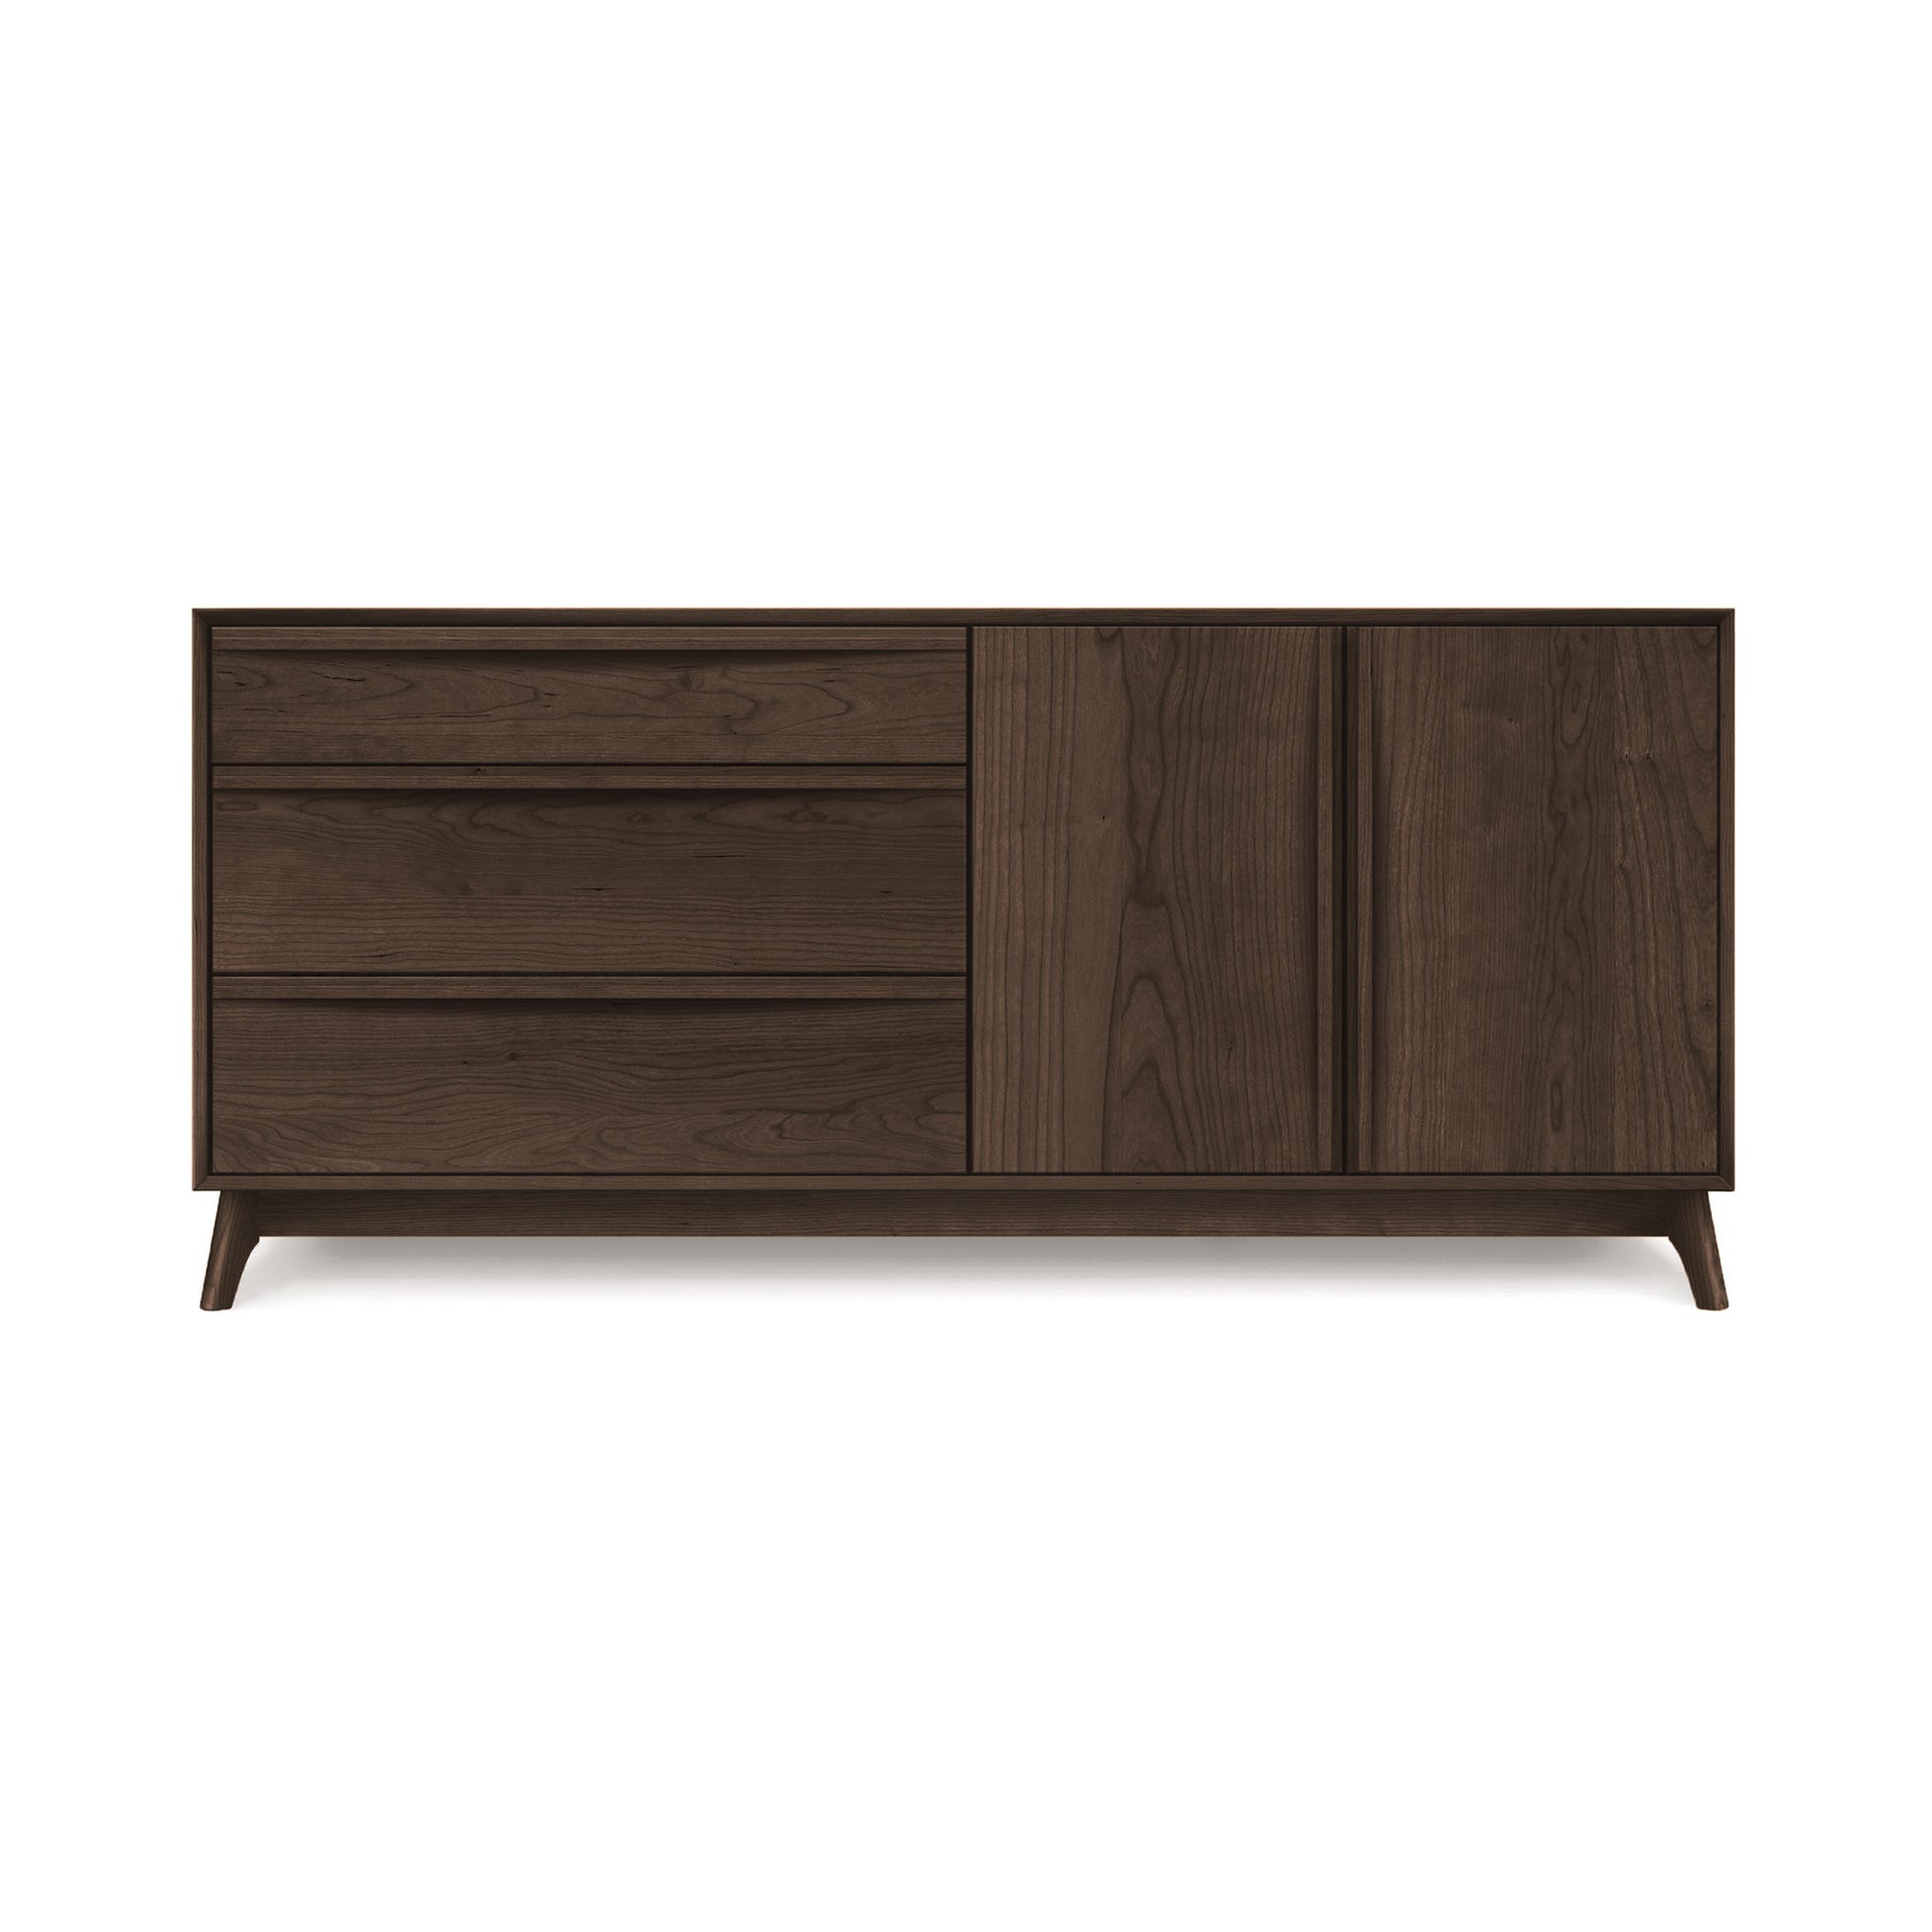 A modern Copeland Furniture Catalina 3-Drawers, 2-Door Buffet with drawers on the left and a cupboard on the right, standing on angled legs against a white background.